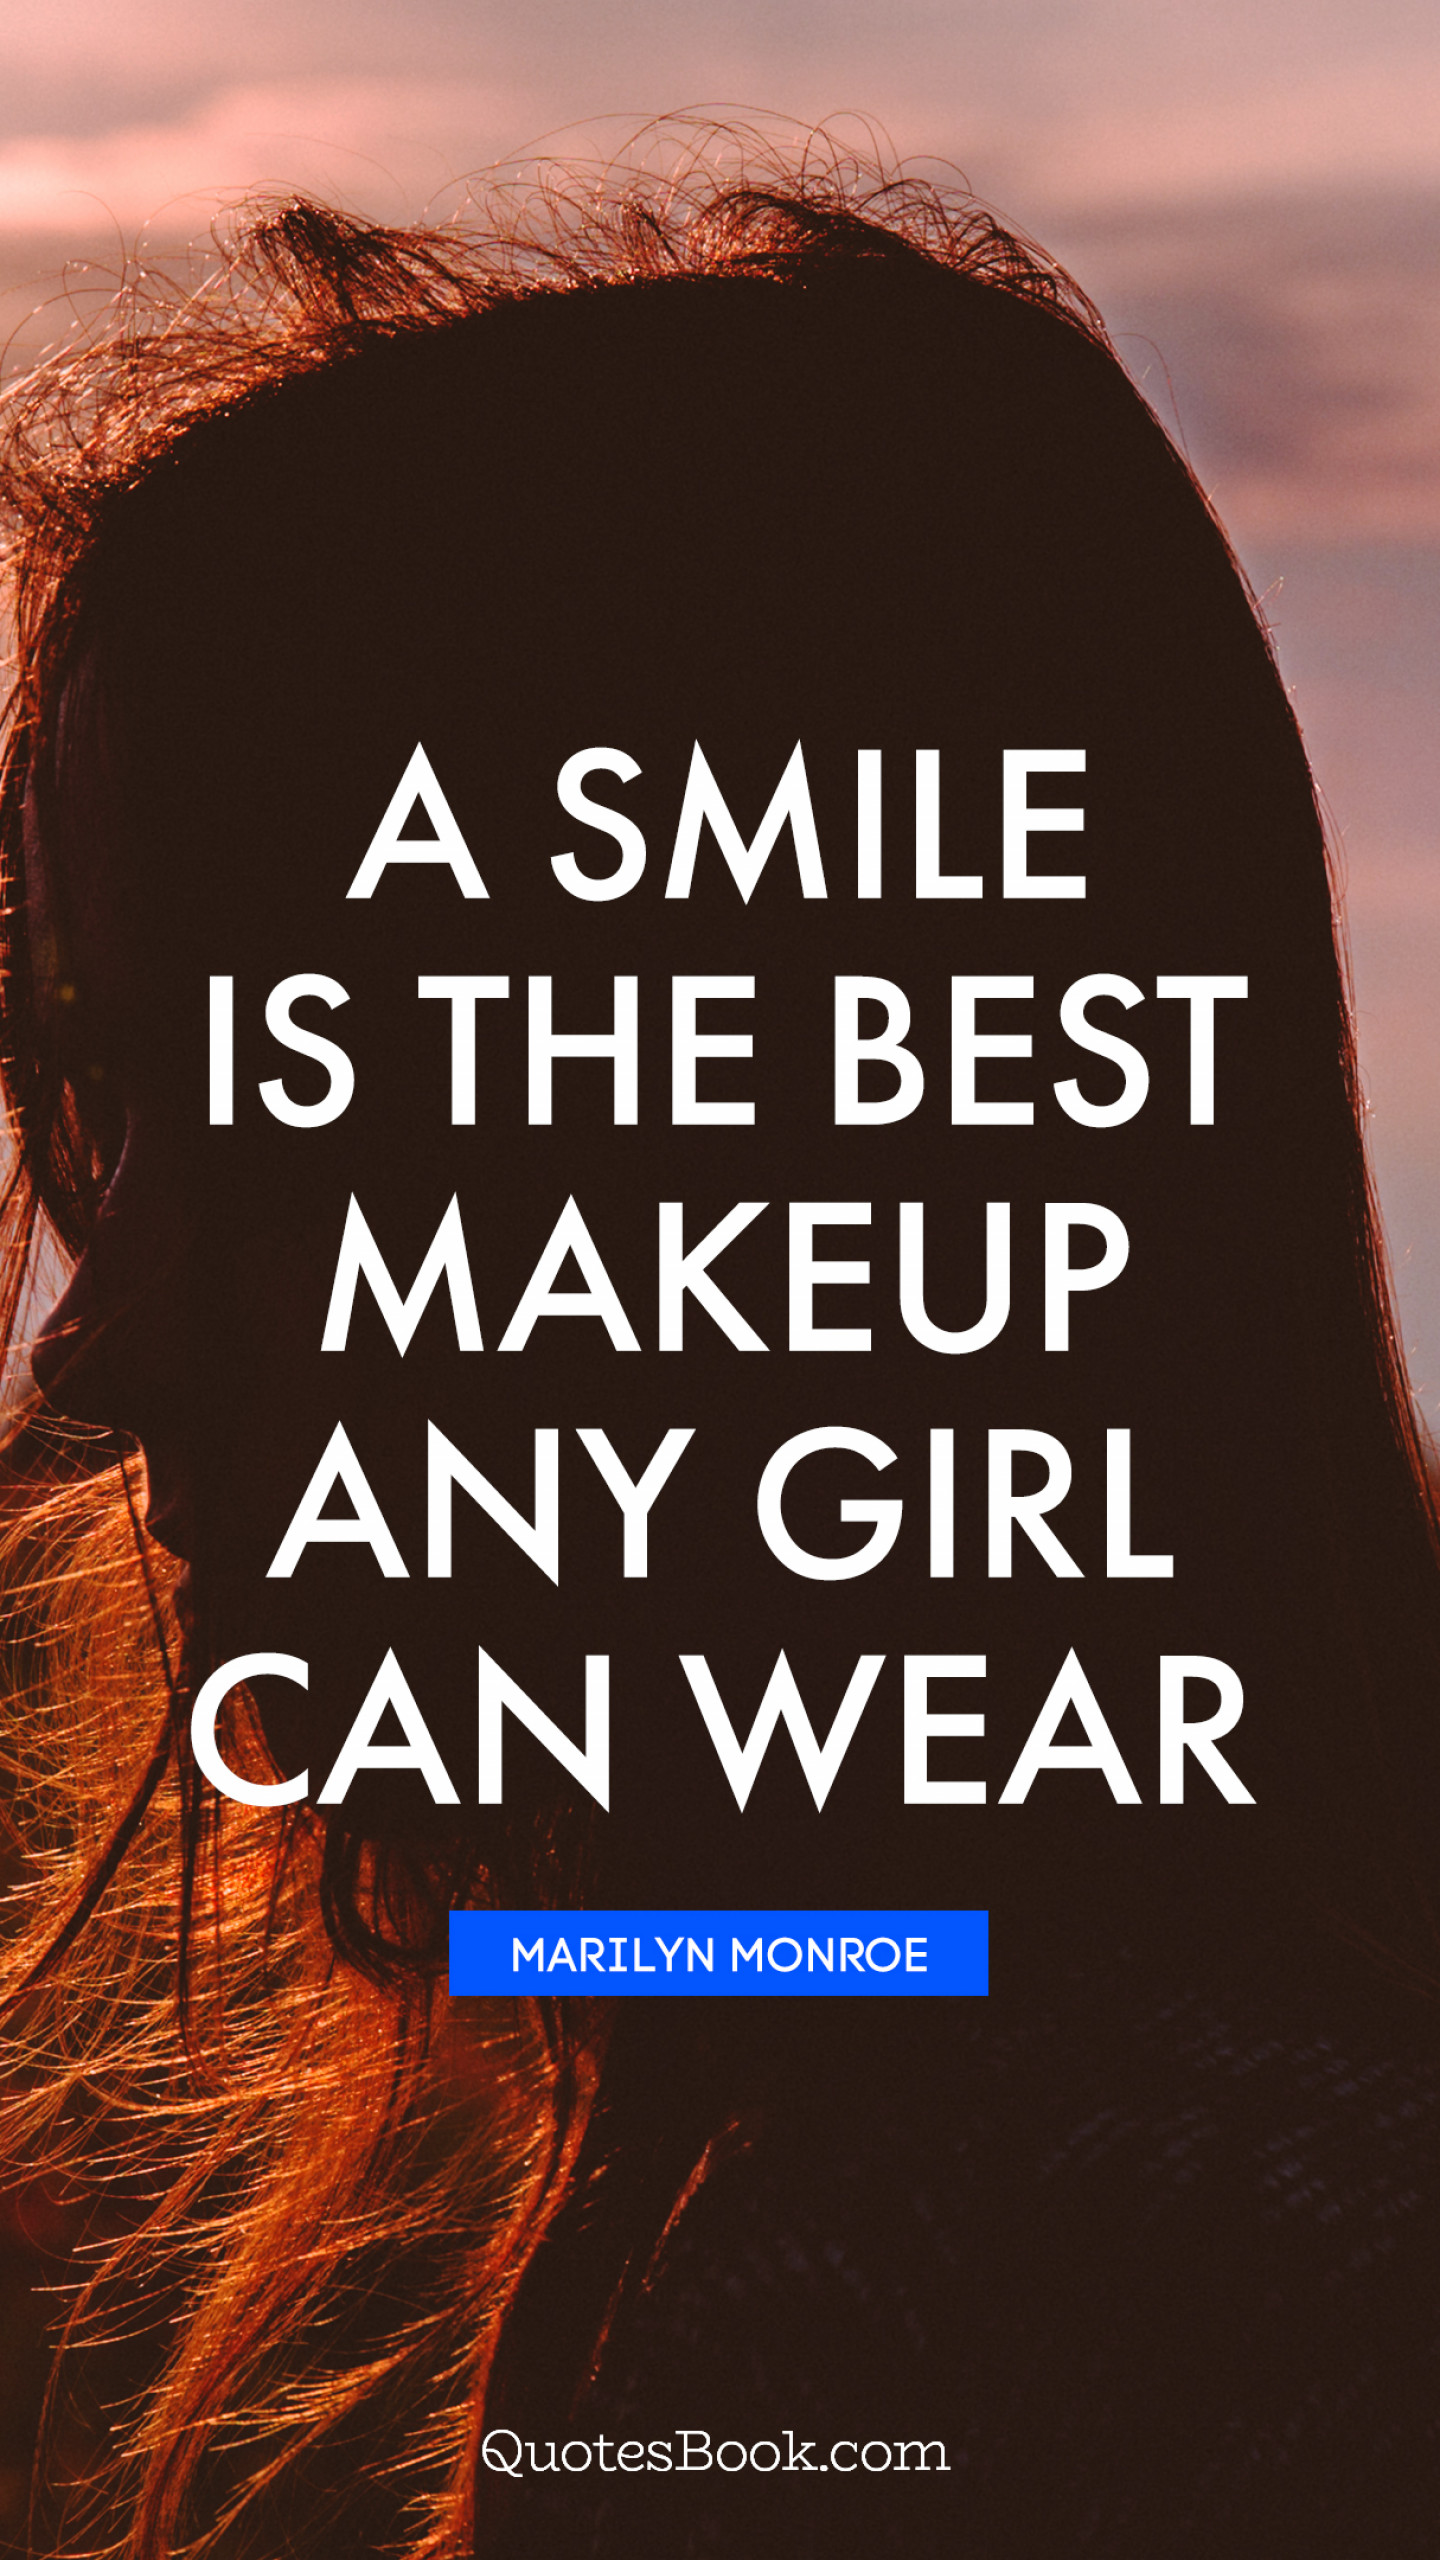 smile the best makeup any girl can wear. - Quote by Marilyn Monroe -